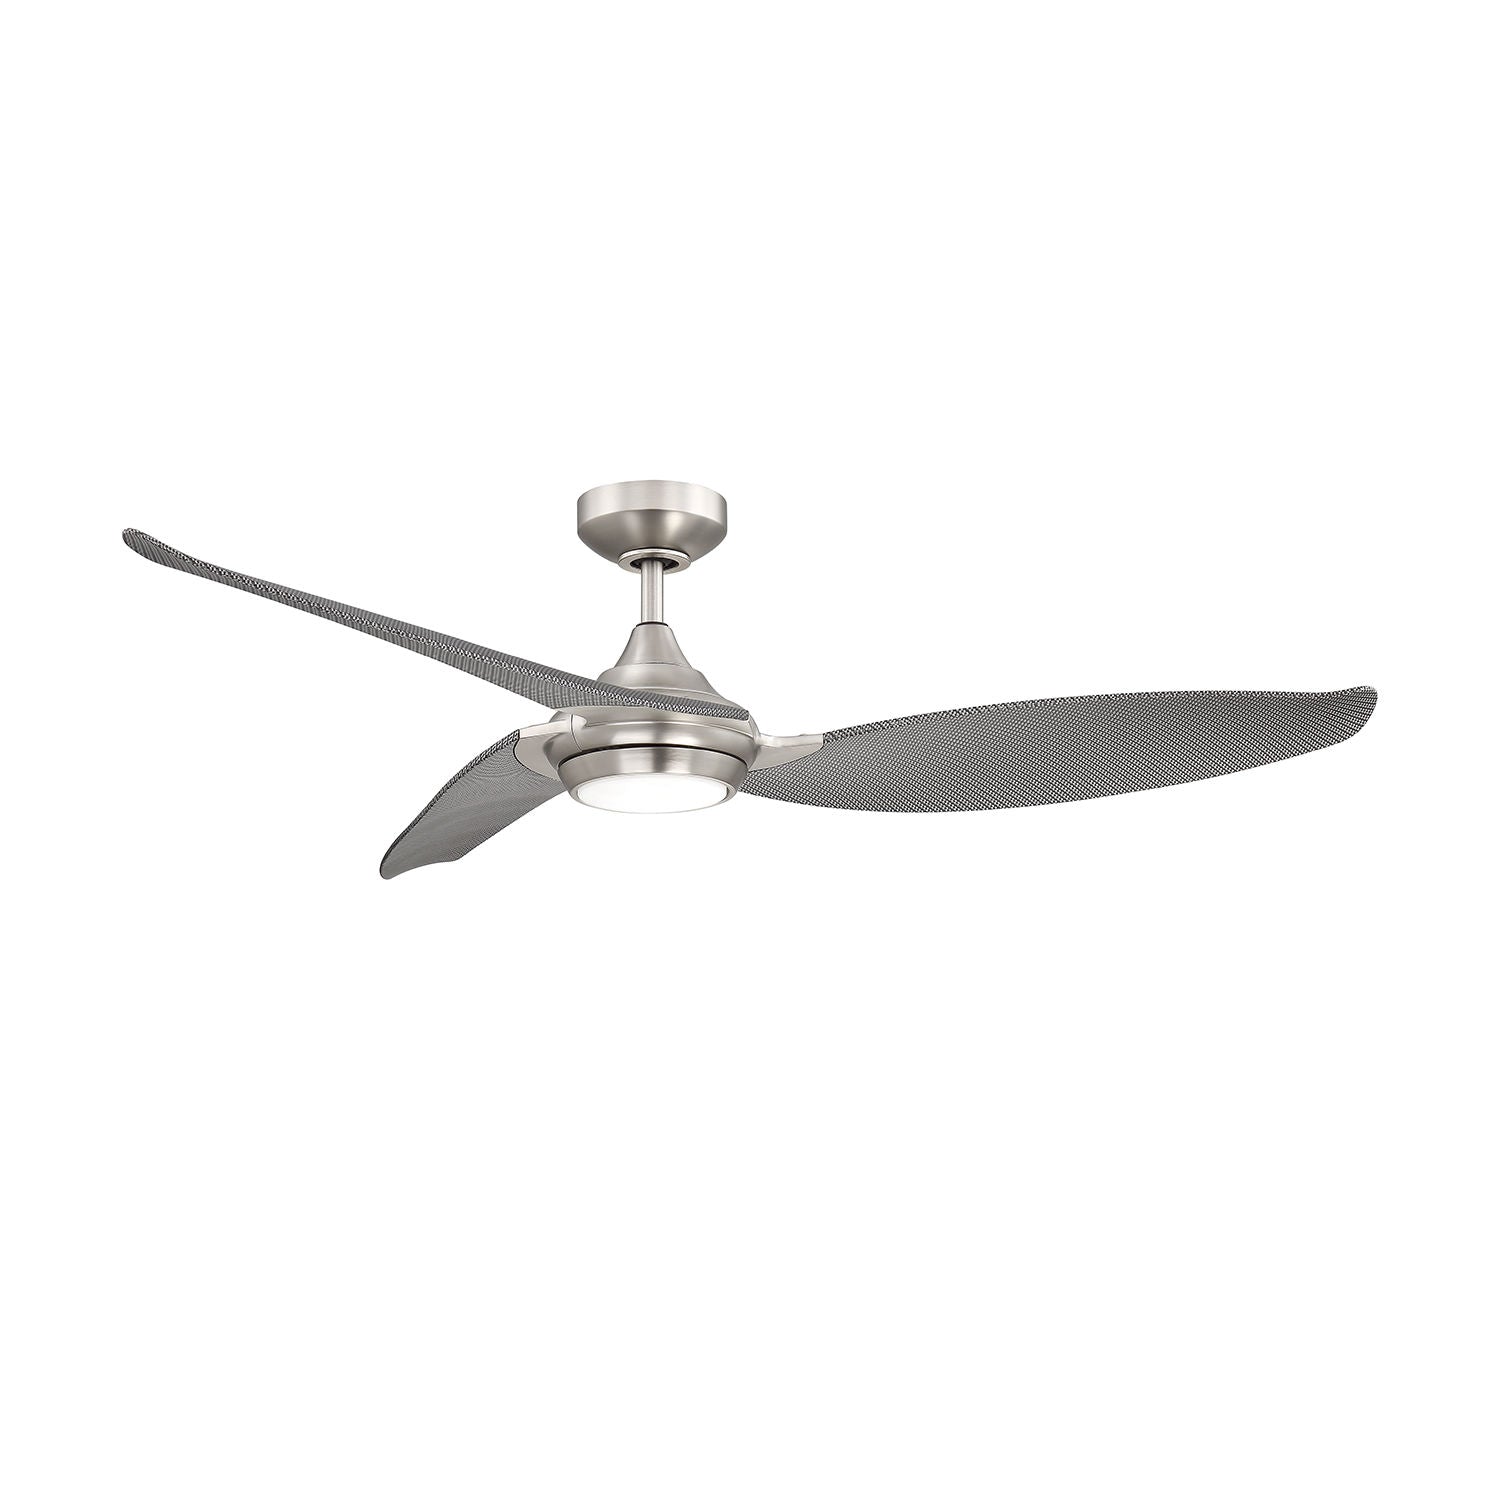 VIRTUA Ceiling fan Stainless steel INTEGRATED LED - AC22752-SN-CF | KENDAL